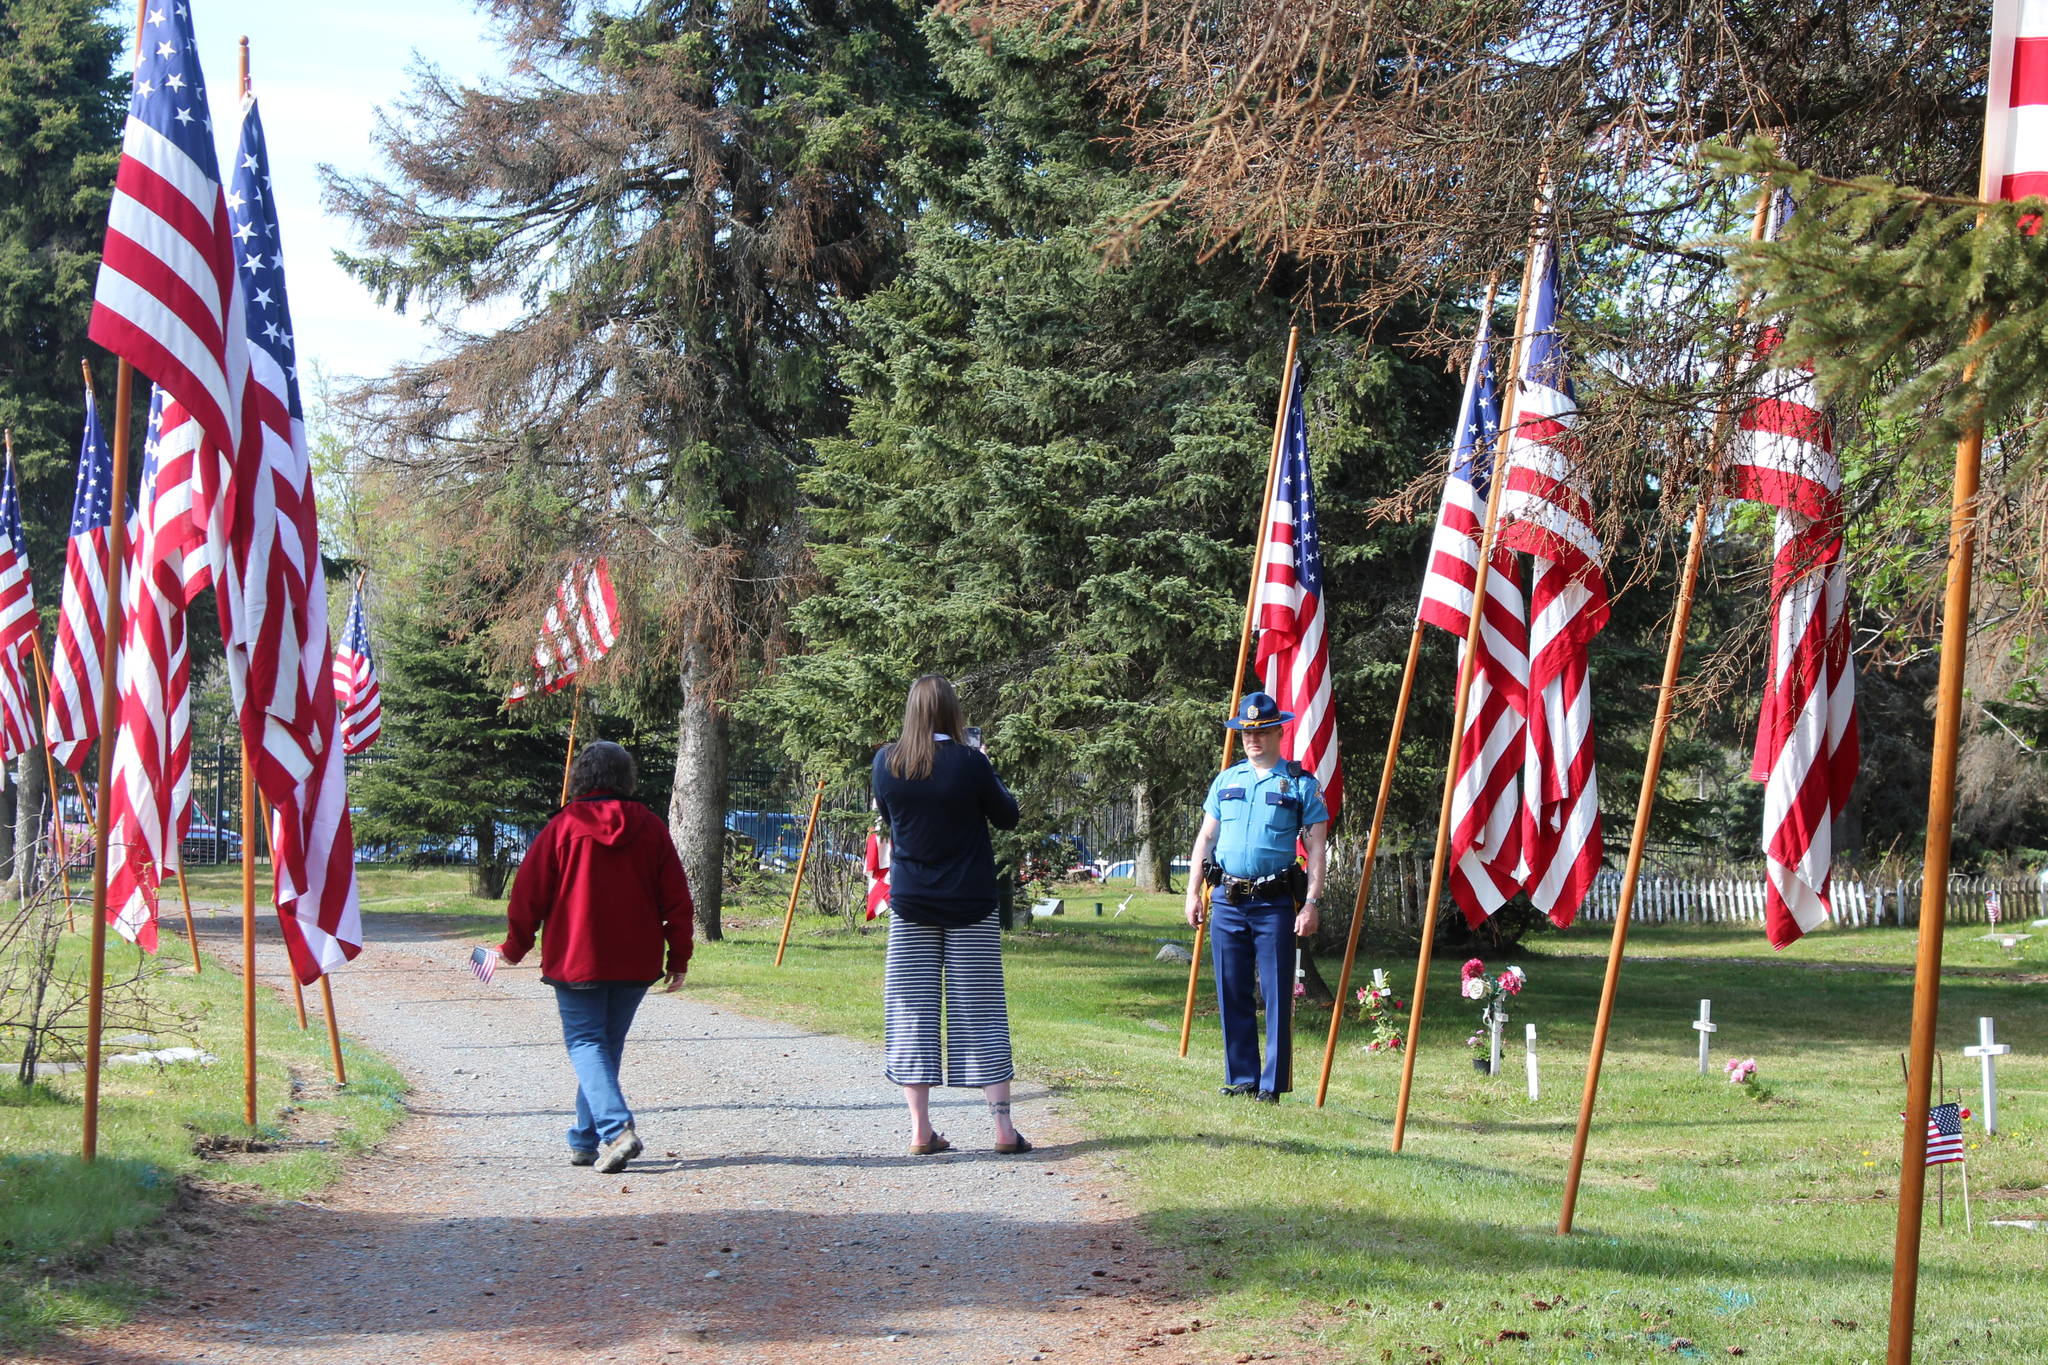 Kenai residents take a moment to honor fallen veterans during the Memorial Day ceremony at the Kenai Cemetery on May 25, 2020. (Photo by Brian Mazurek/Peninsula Clarion)